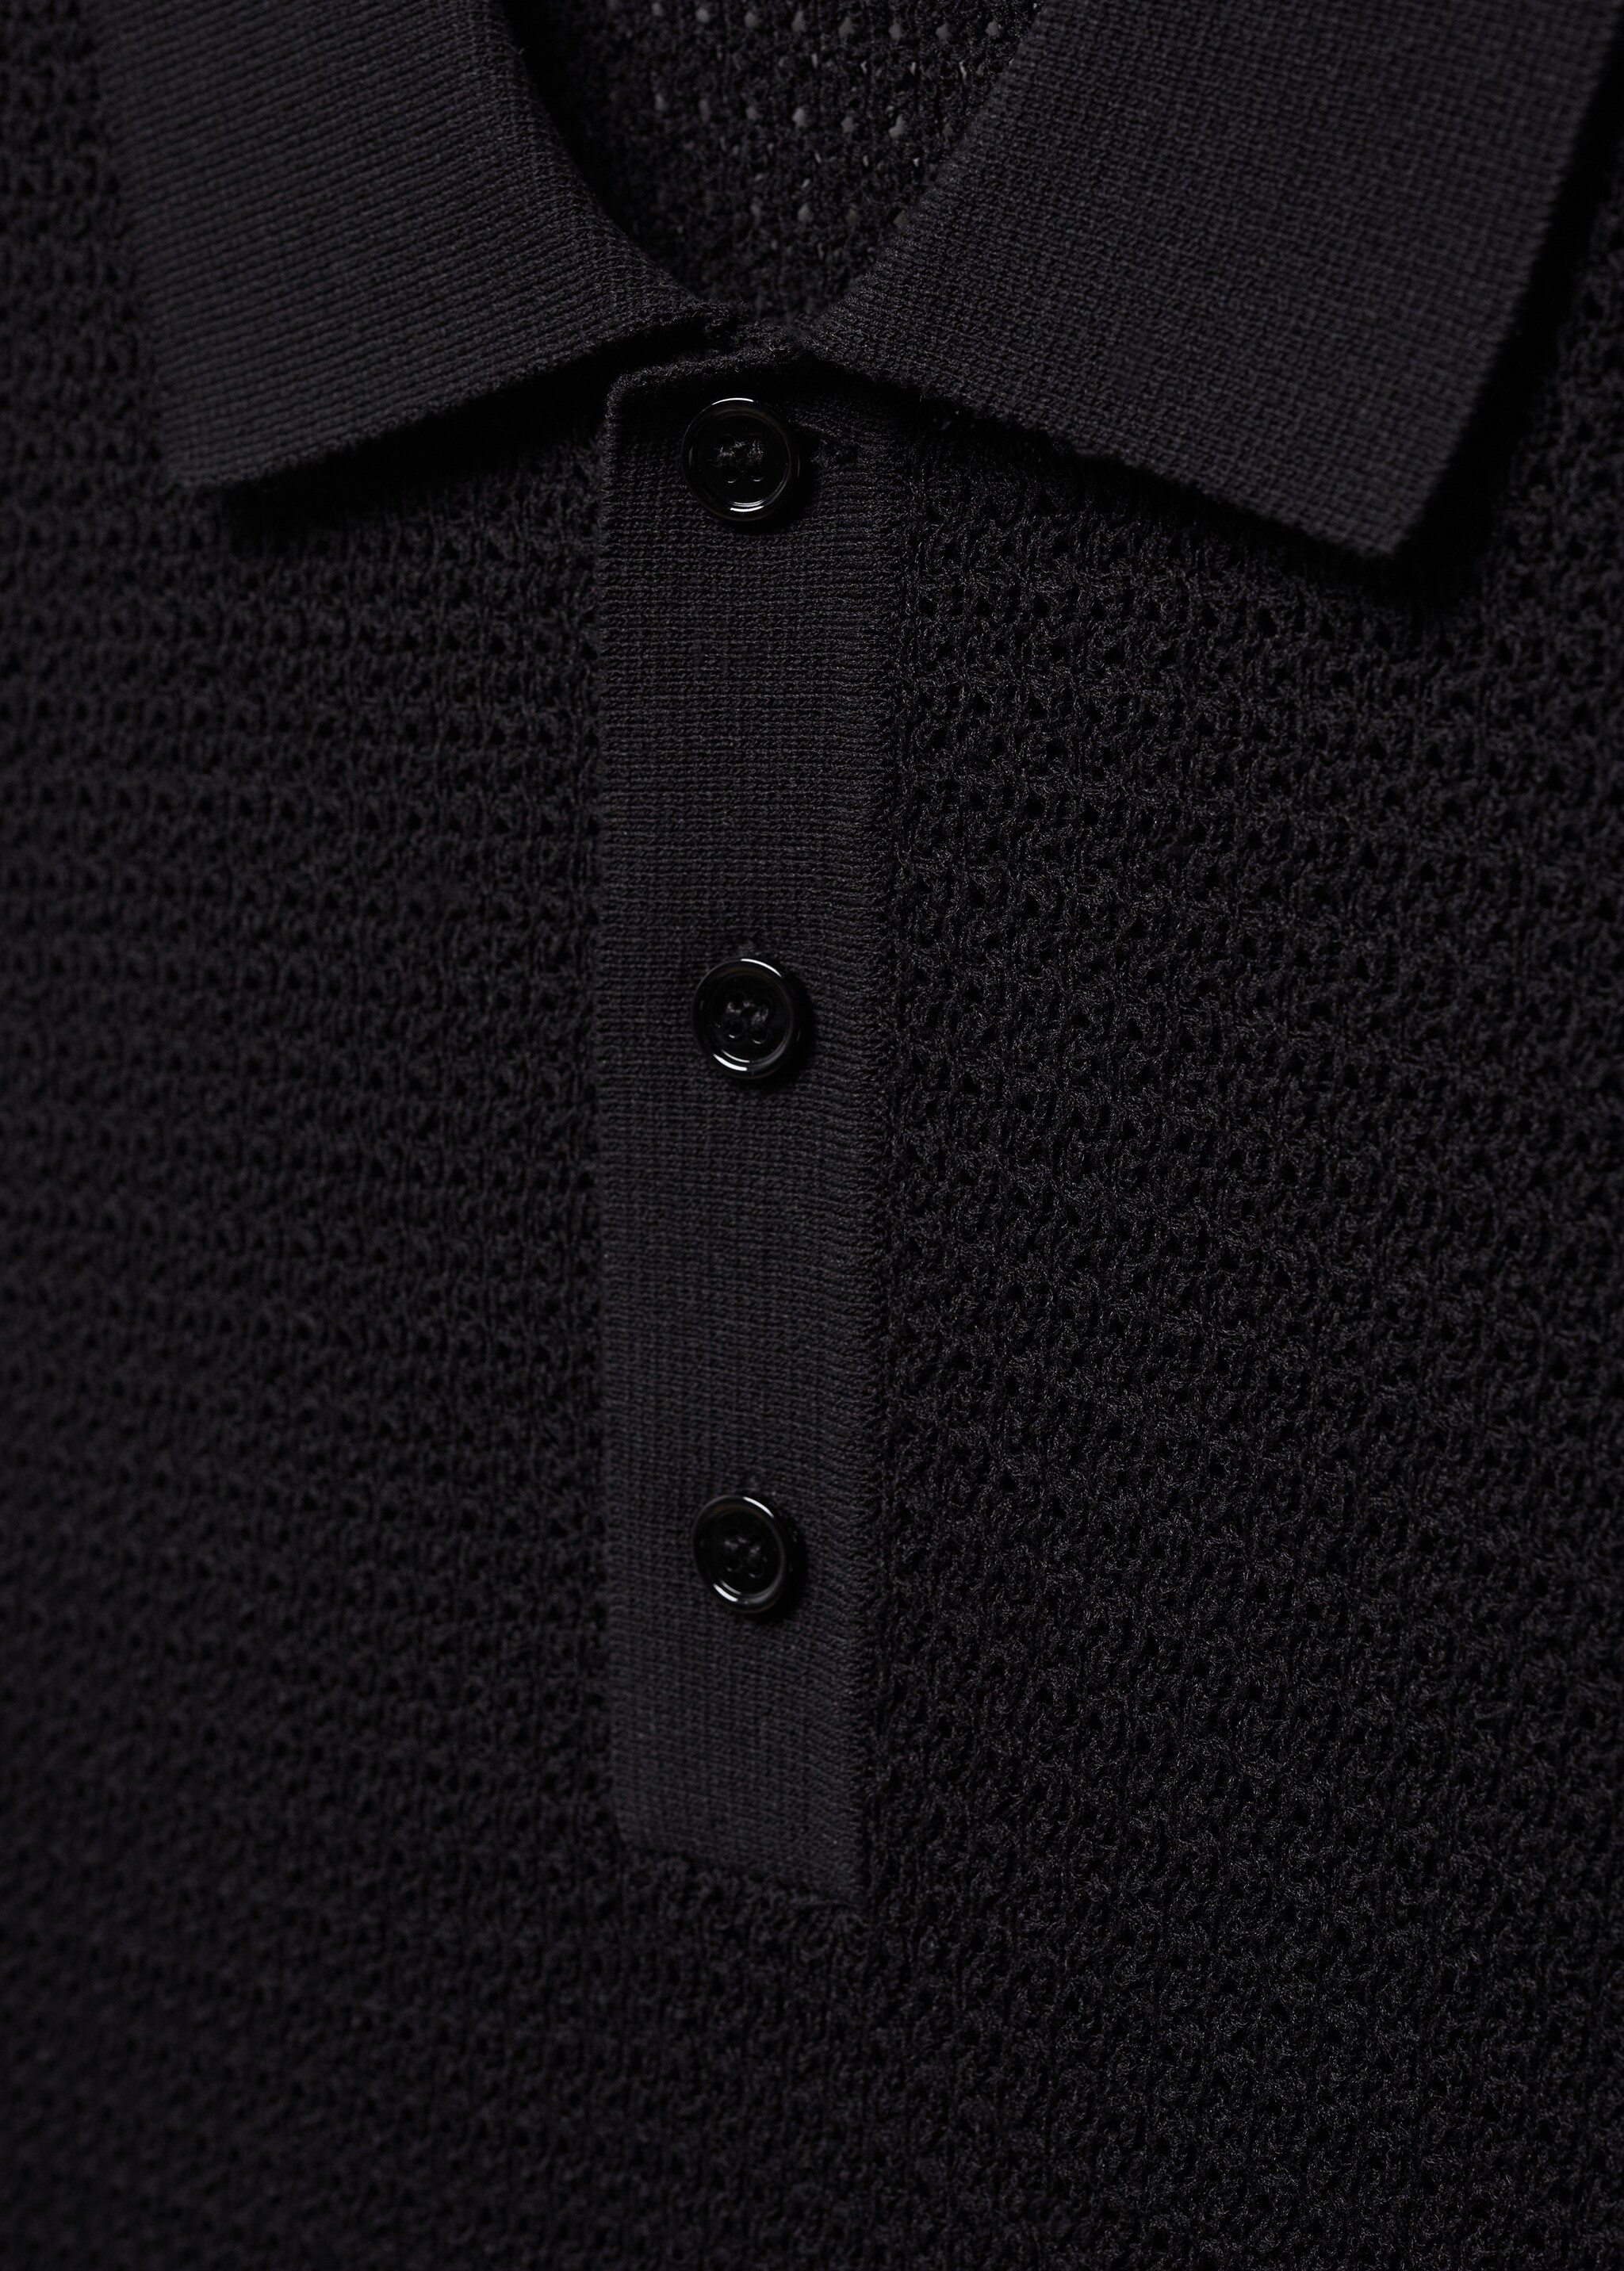 Openwork knit polo - Details of the article 8